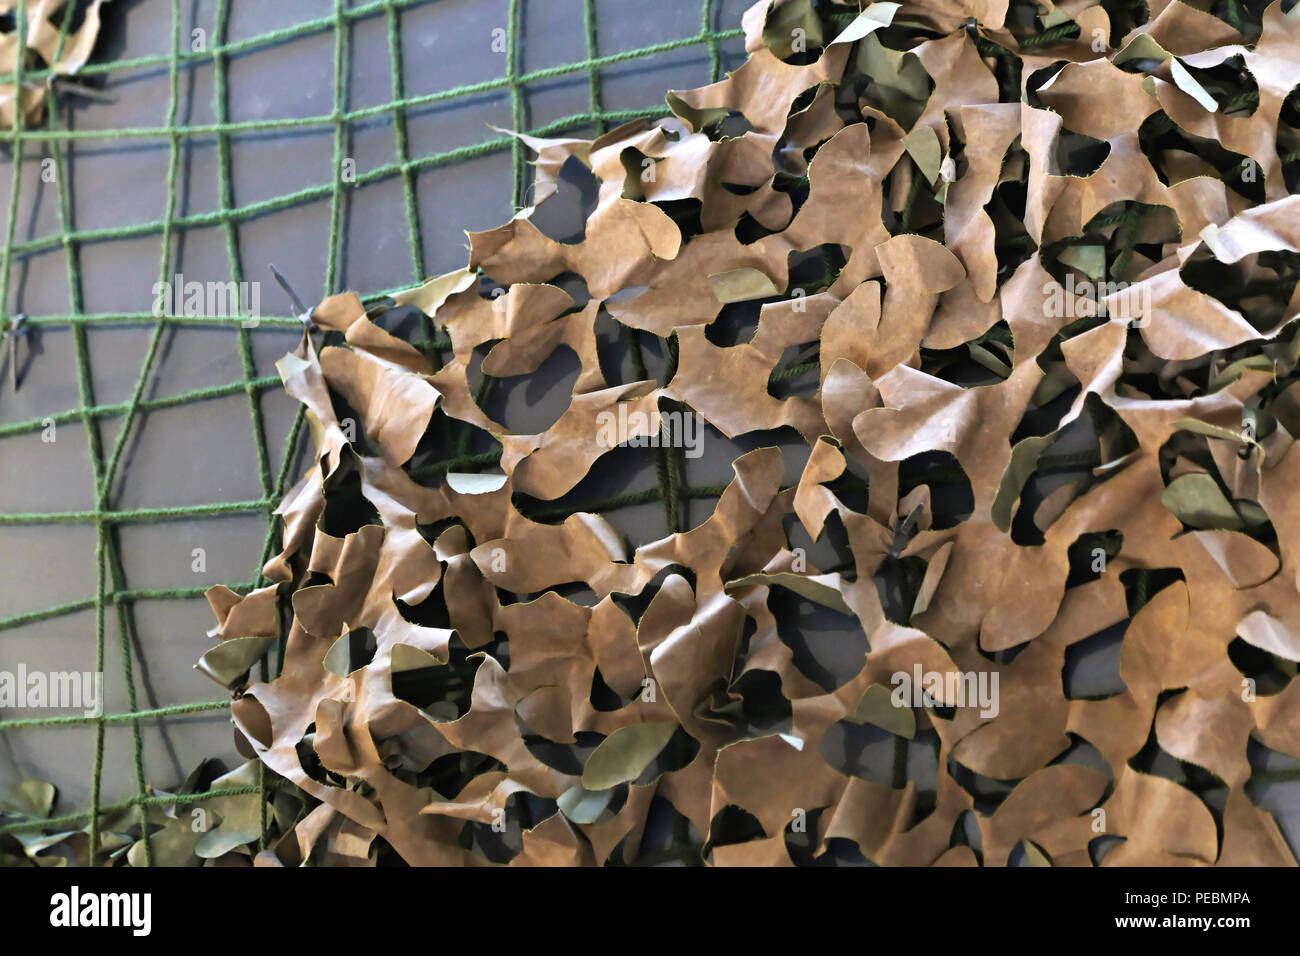 Camouflage netting for military or hunting use Stock Photo - Alamy